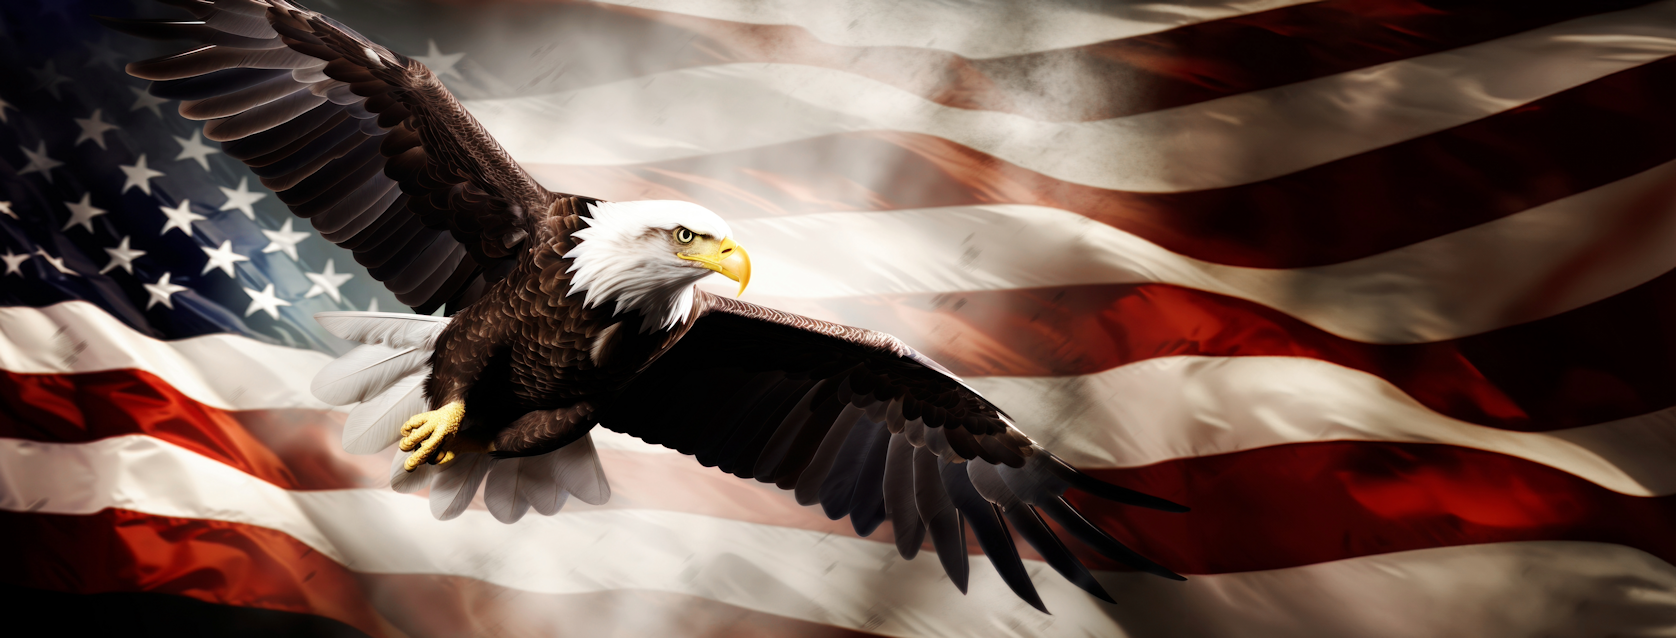 An American flag in the background with an American eagle flying in the foreground